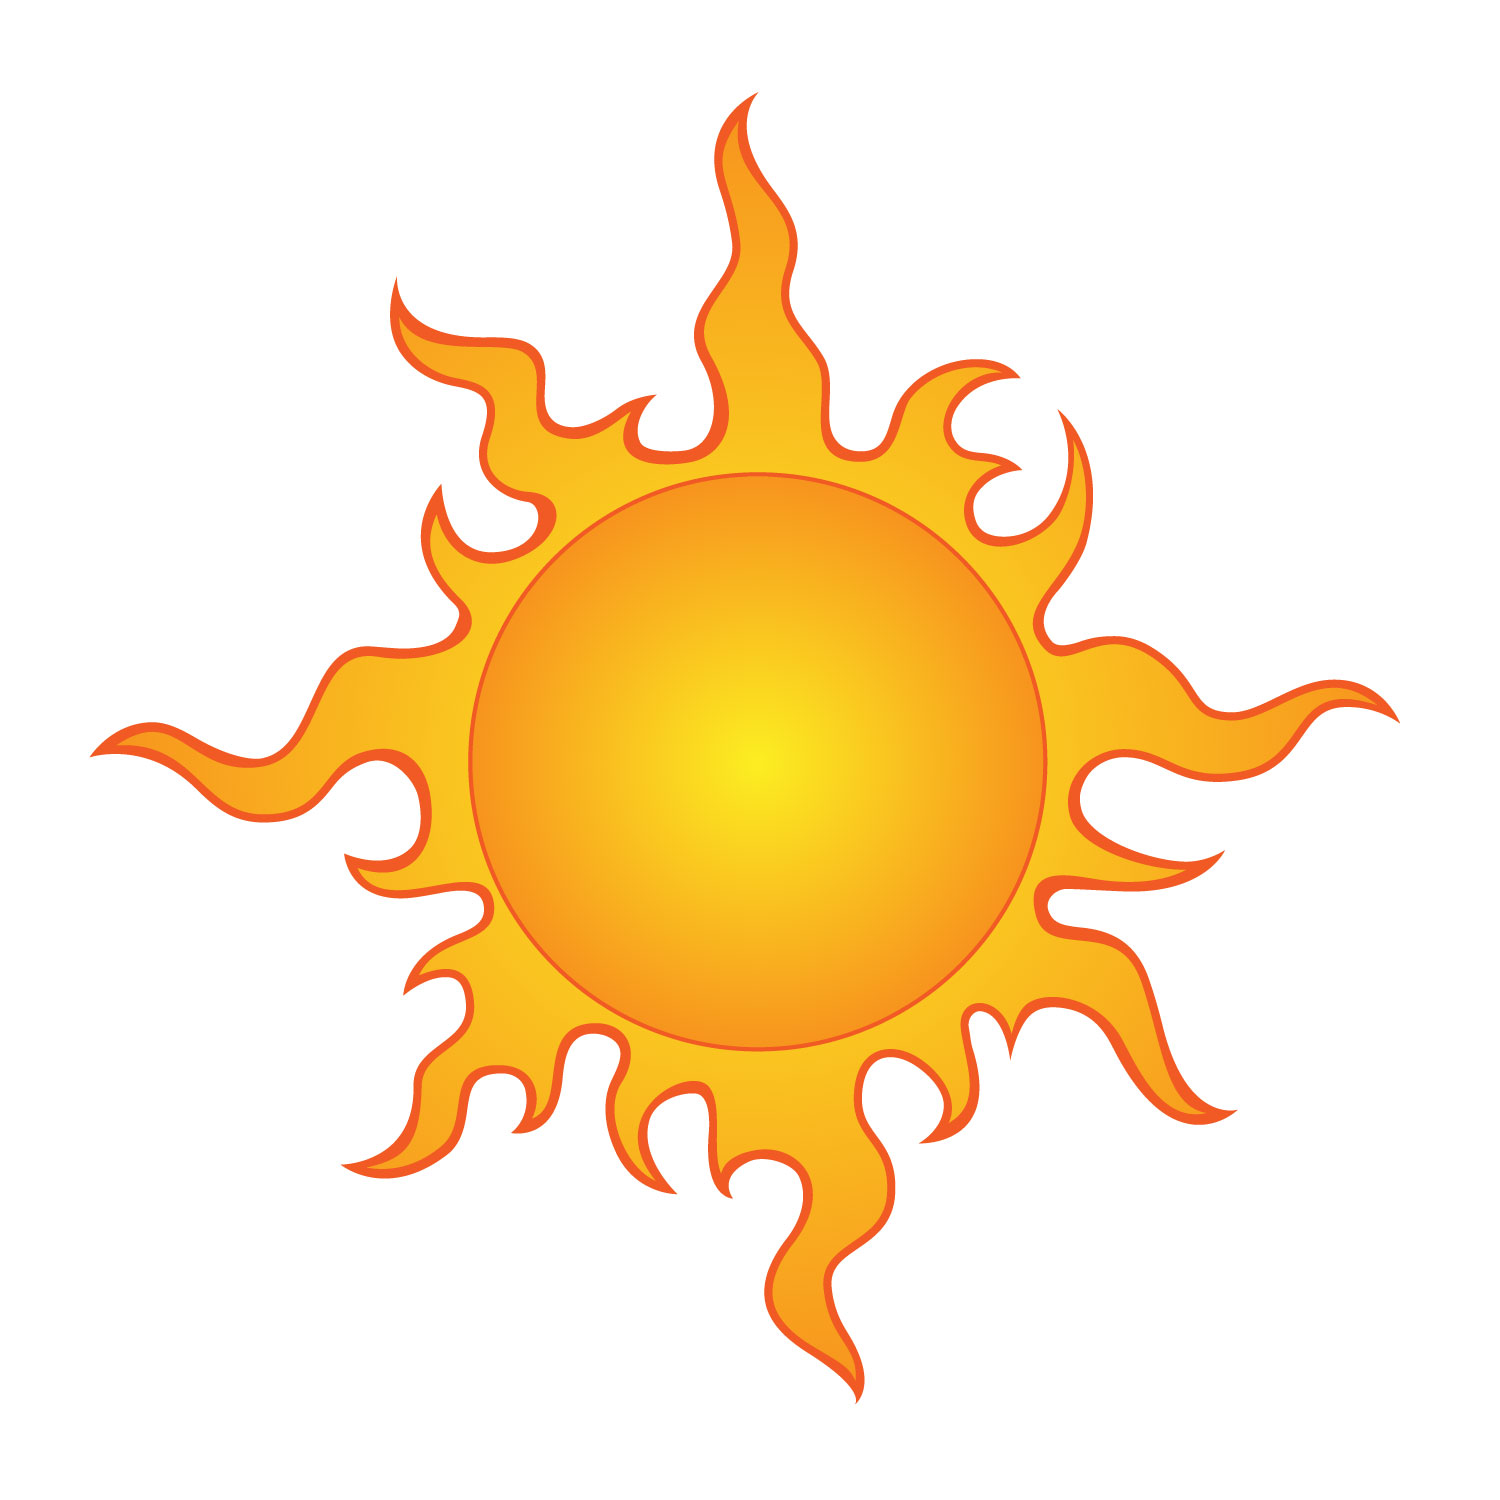 Free Sun Drawings, Download Free Clip Art, Free Clip Art on